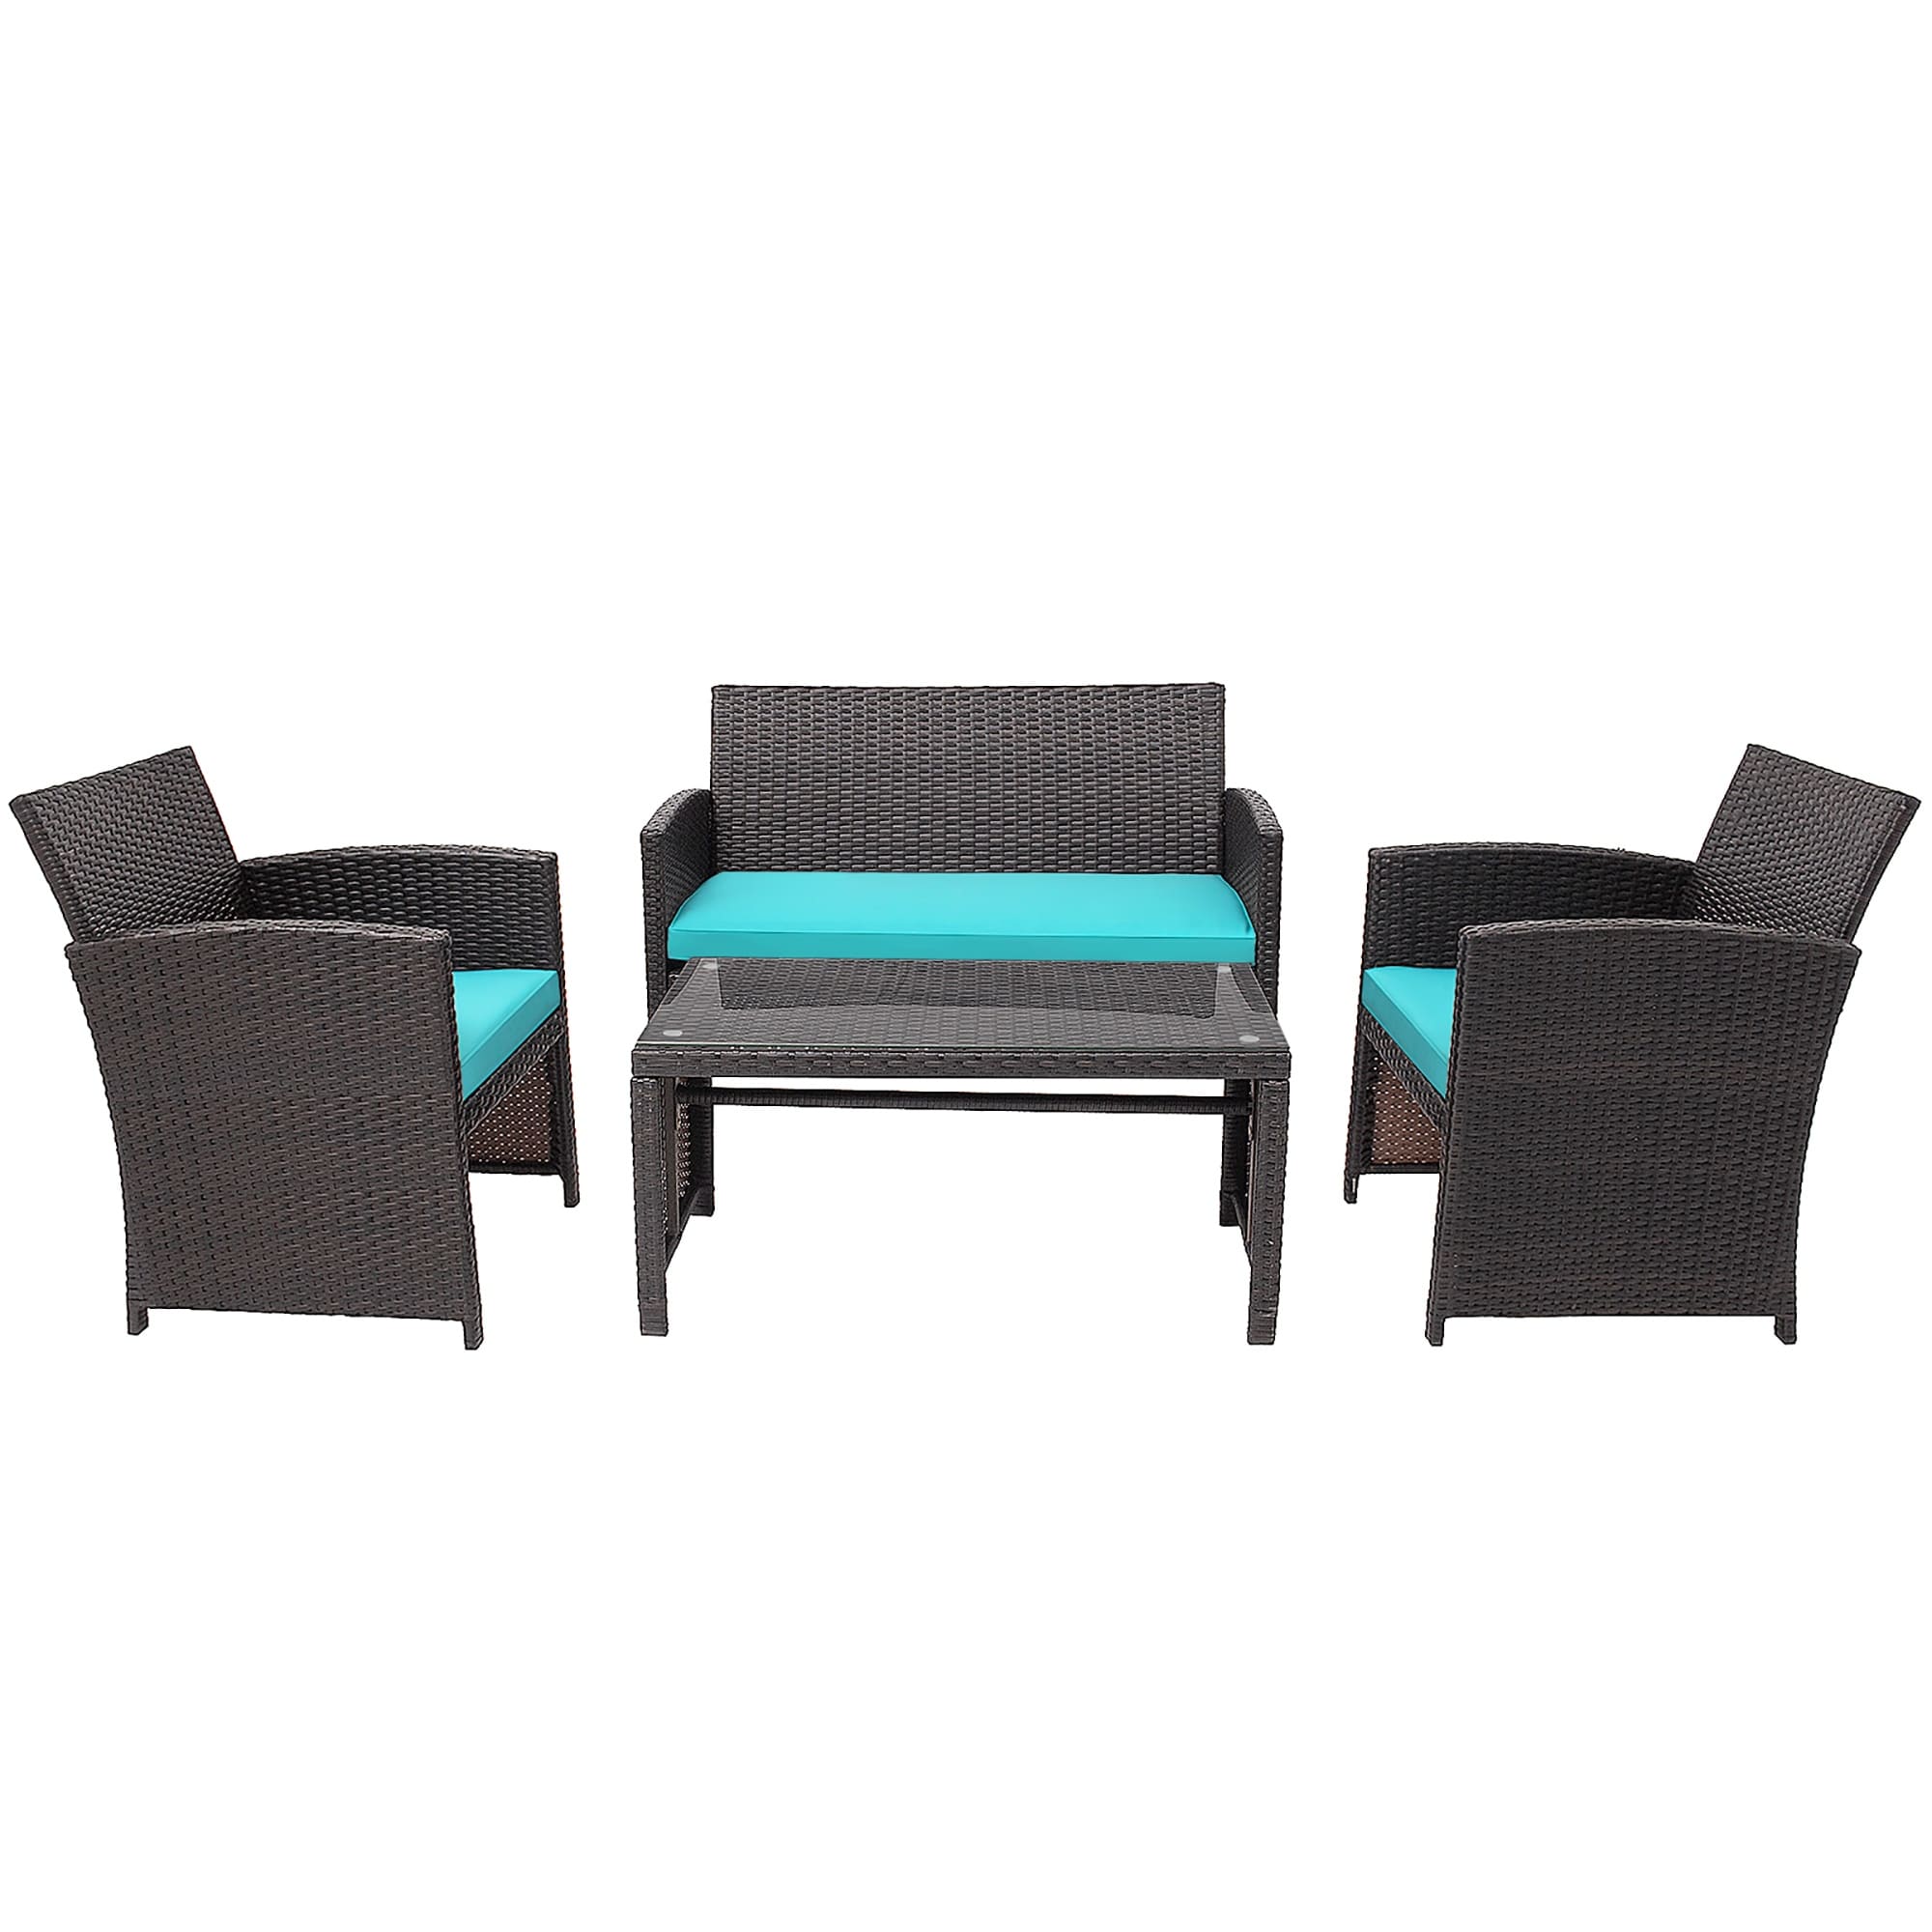 4 Pcs Outdoor Rattan Furniture Set W/ Cushioned Chair and Coffee Table